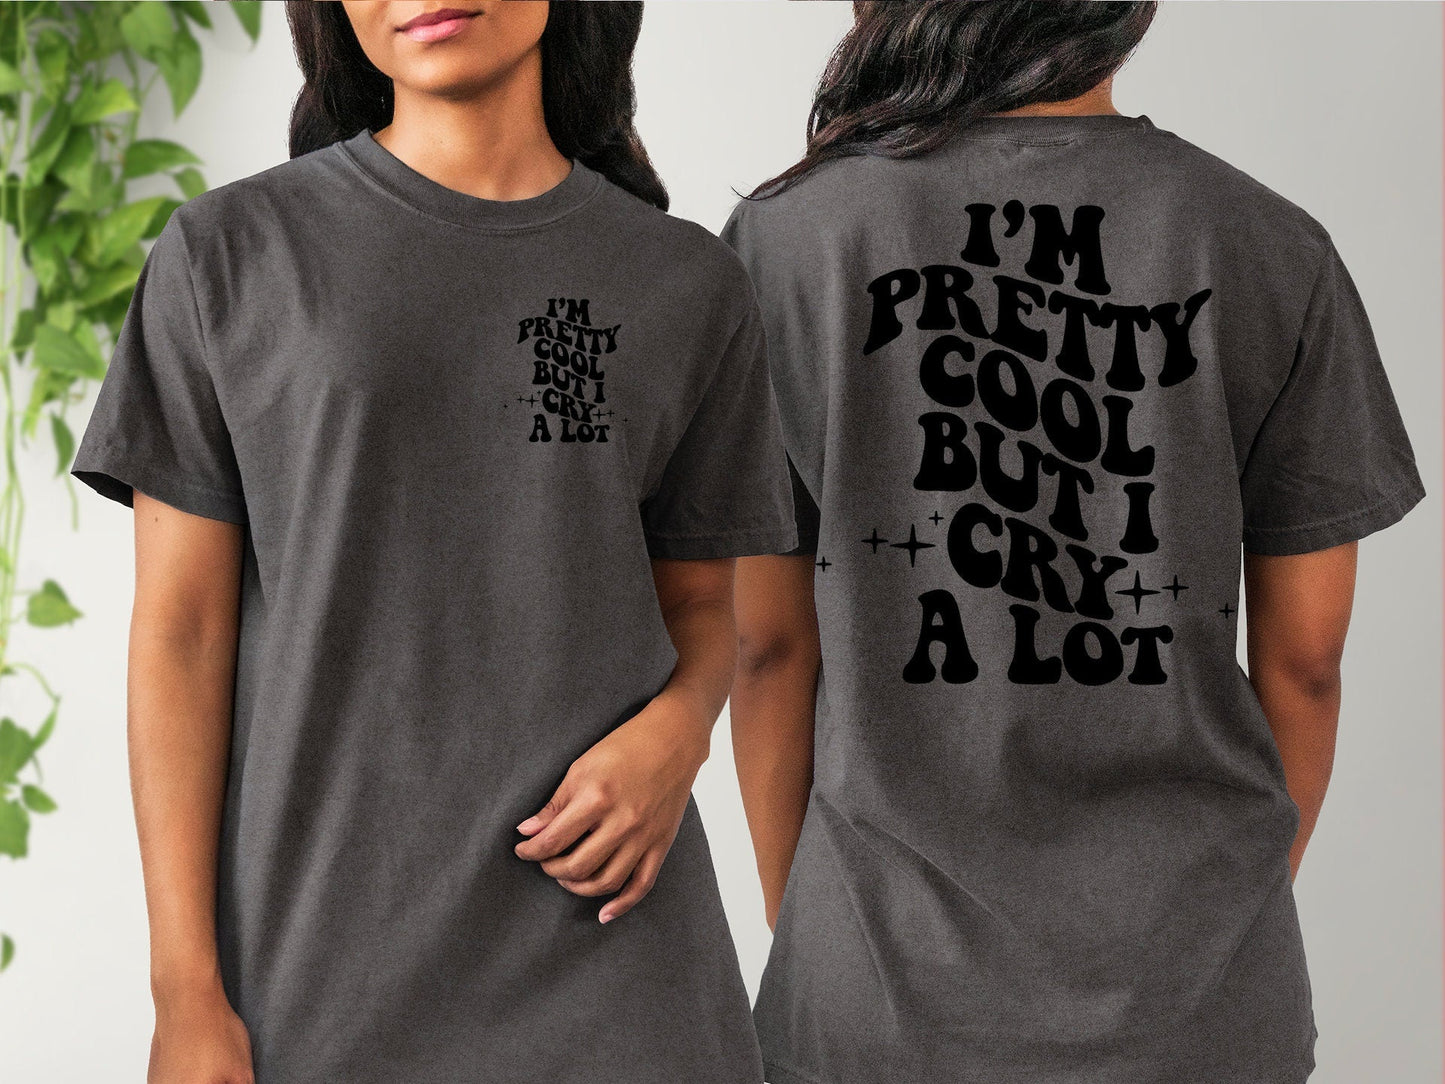 Im Pretty Cool But I Cry Alot Oversized Comfort Colors T-shirt